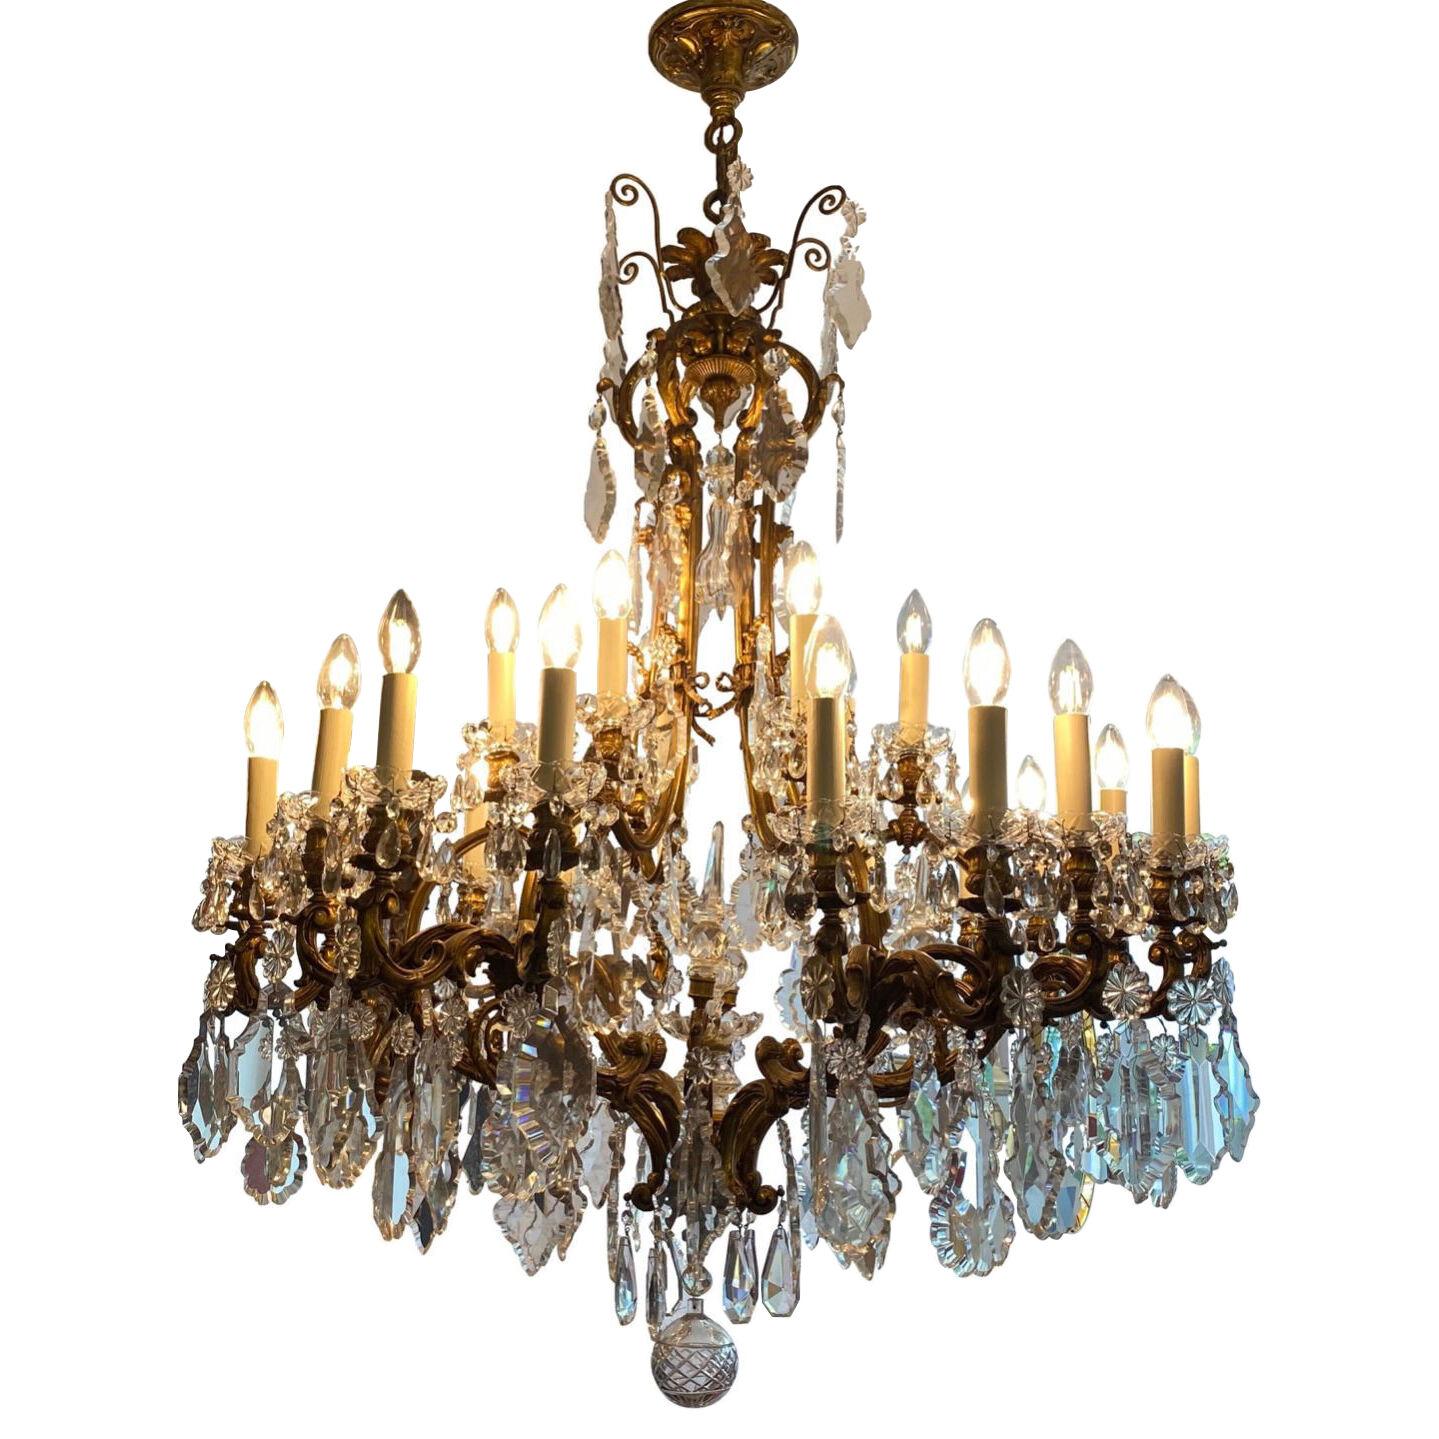 19th Century French 24 Lamp Crystal and Bronze Chandelier